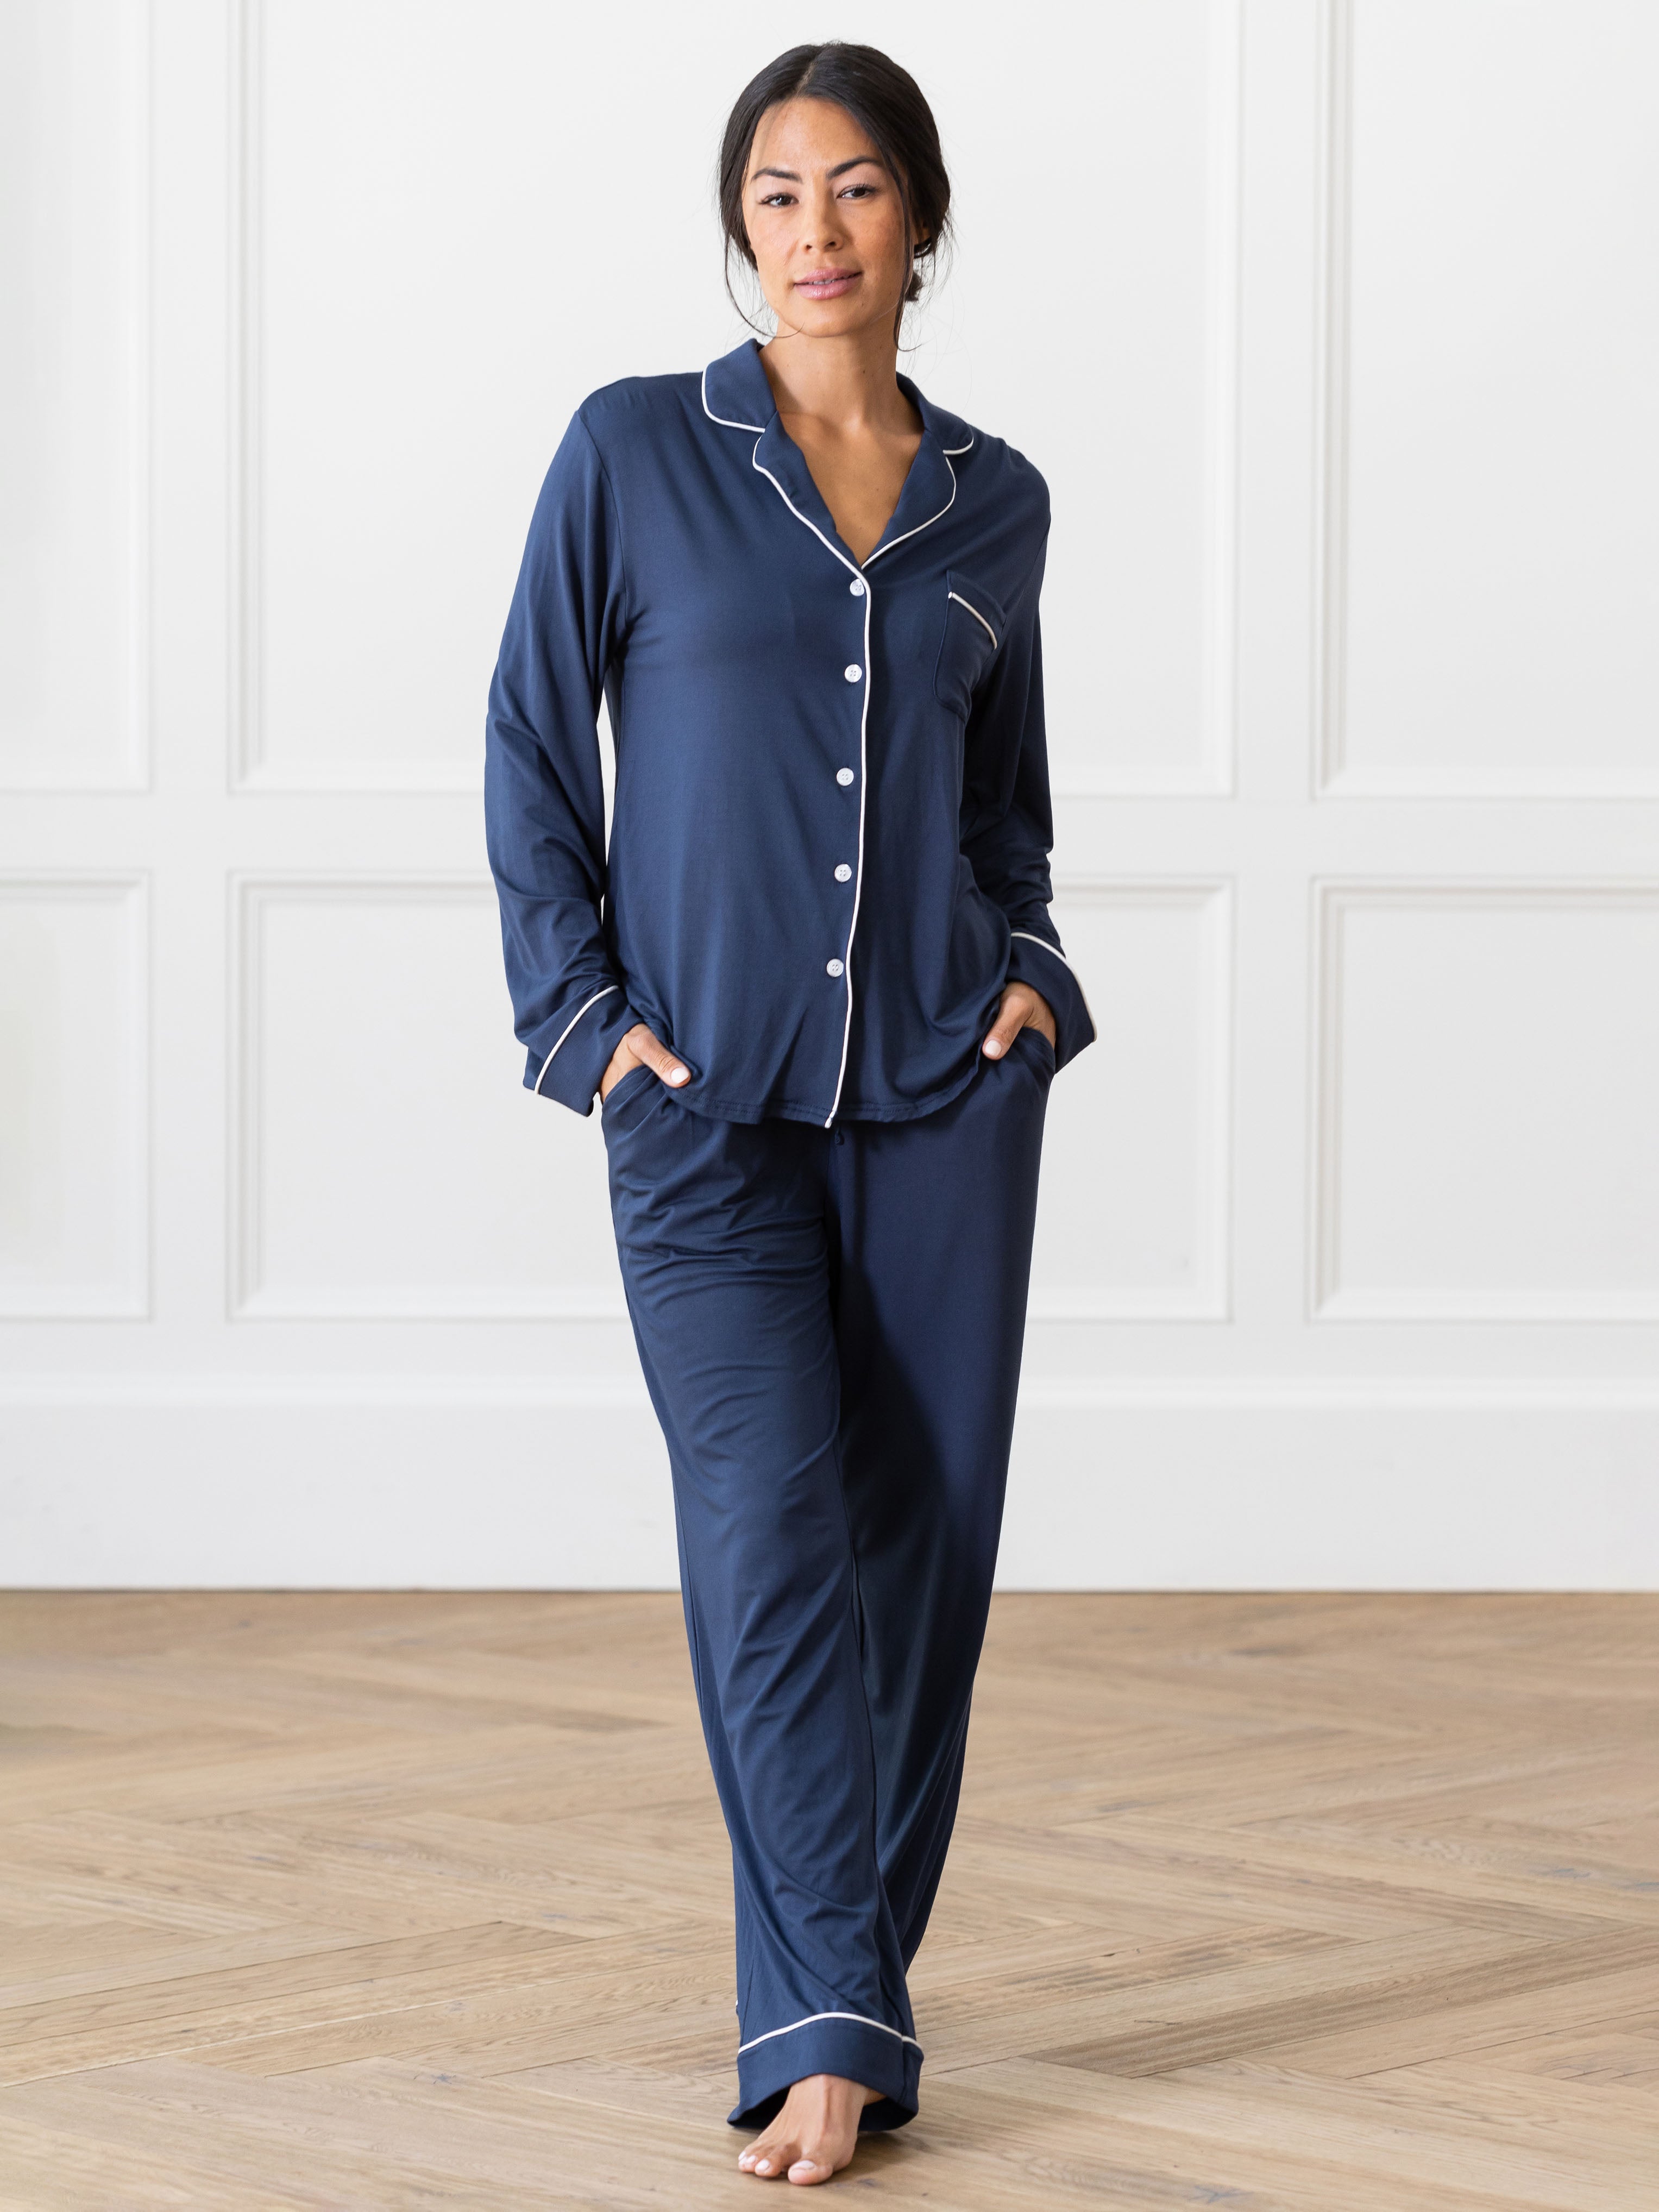 Navy Long Sleeve Pajama Set modeled by a woman. The photo was taken in a light setting, showing off the colors and lines of the pajamas. |Color:Navy